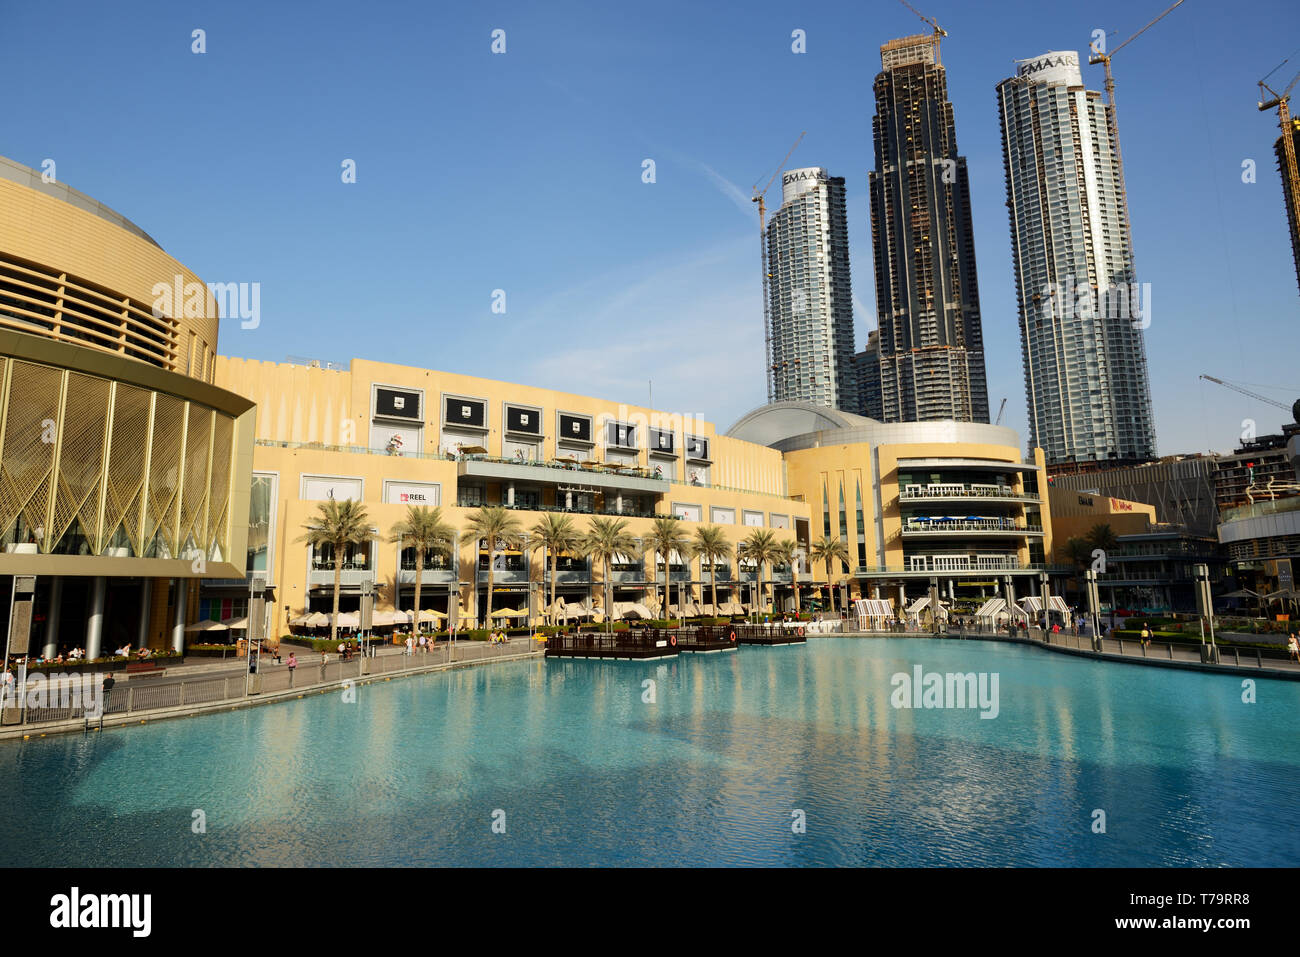 DUBAI, UAE - NOVEMBER 19: The Dubai Mall is the worlds largest shopping mall and construction of new skyscrapers.  It is located in Burj Khalifa compl Stock Photo